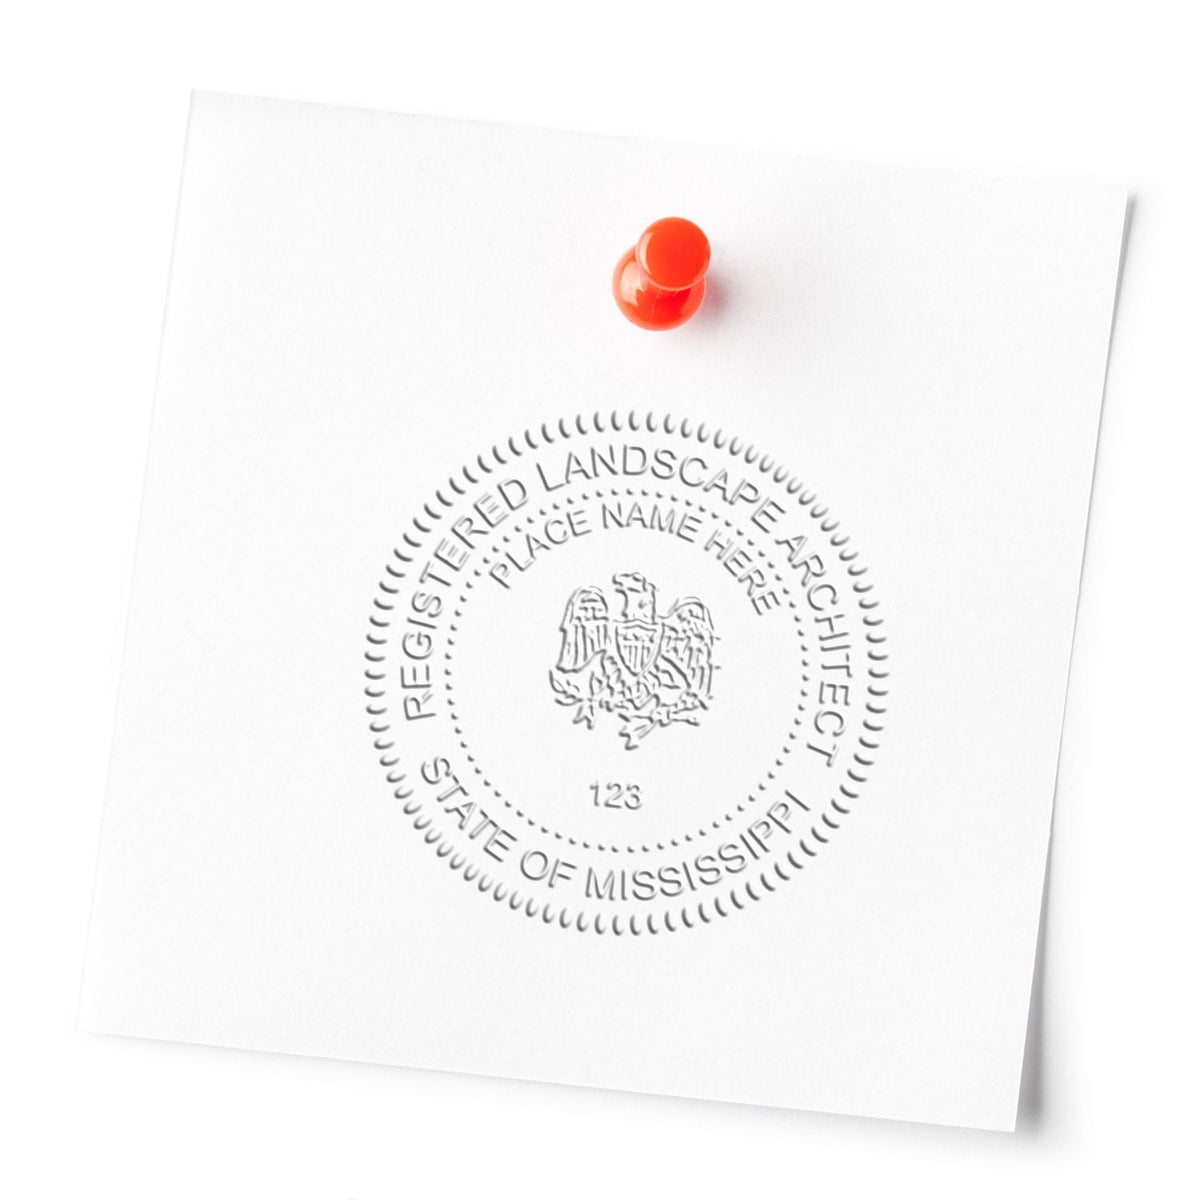 An alternative view of the Gift Mississippi Landscape Architect Seal stamped on a sheet of paper showing the image in use